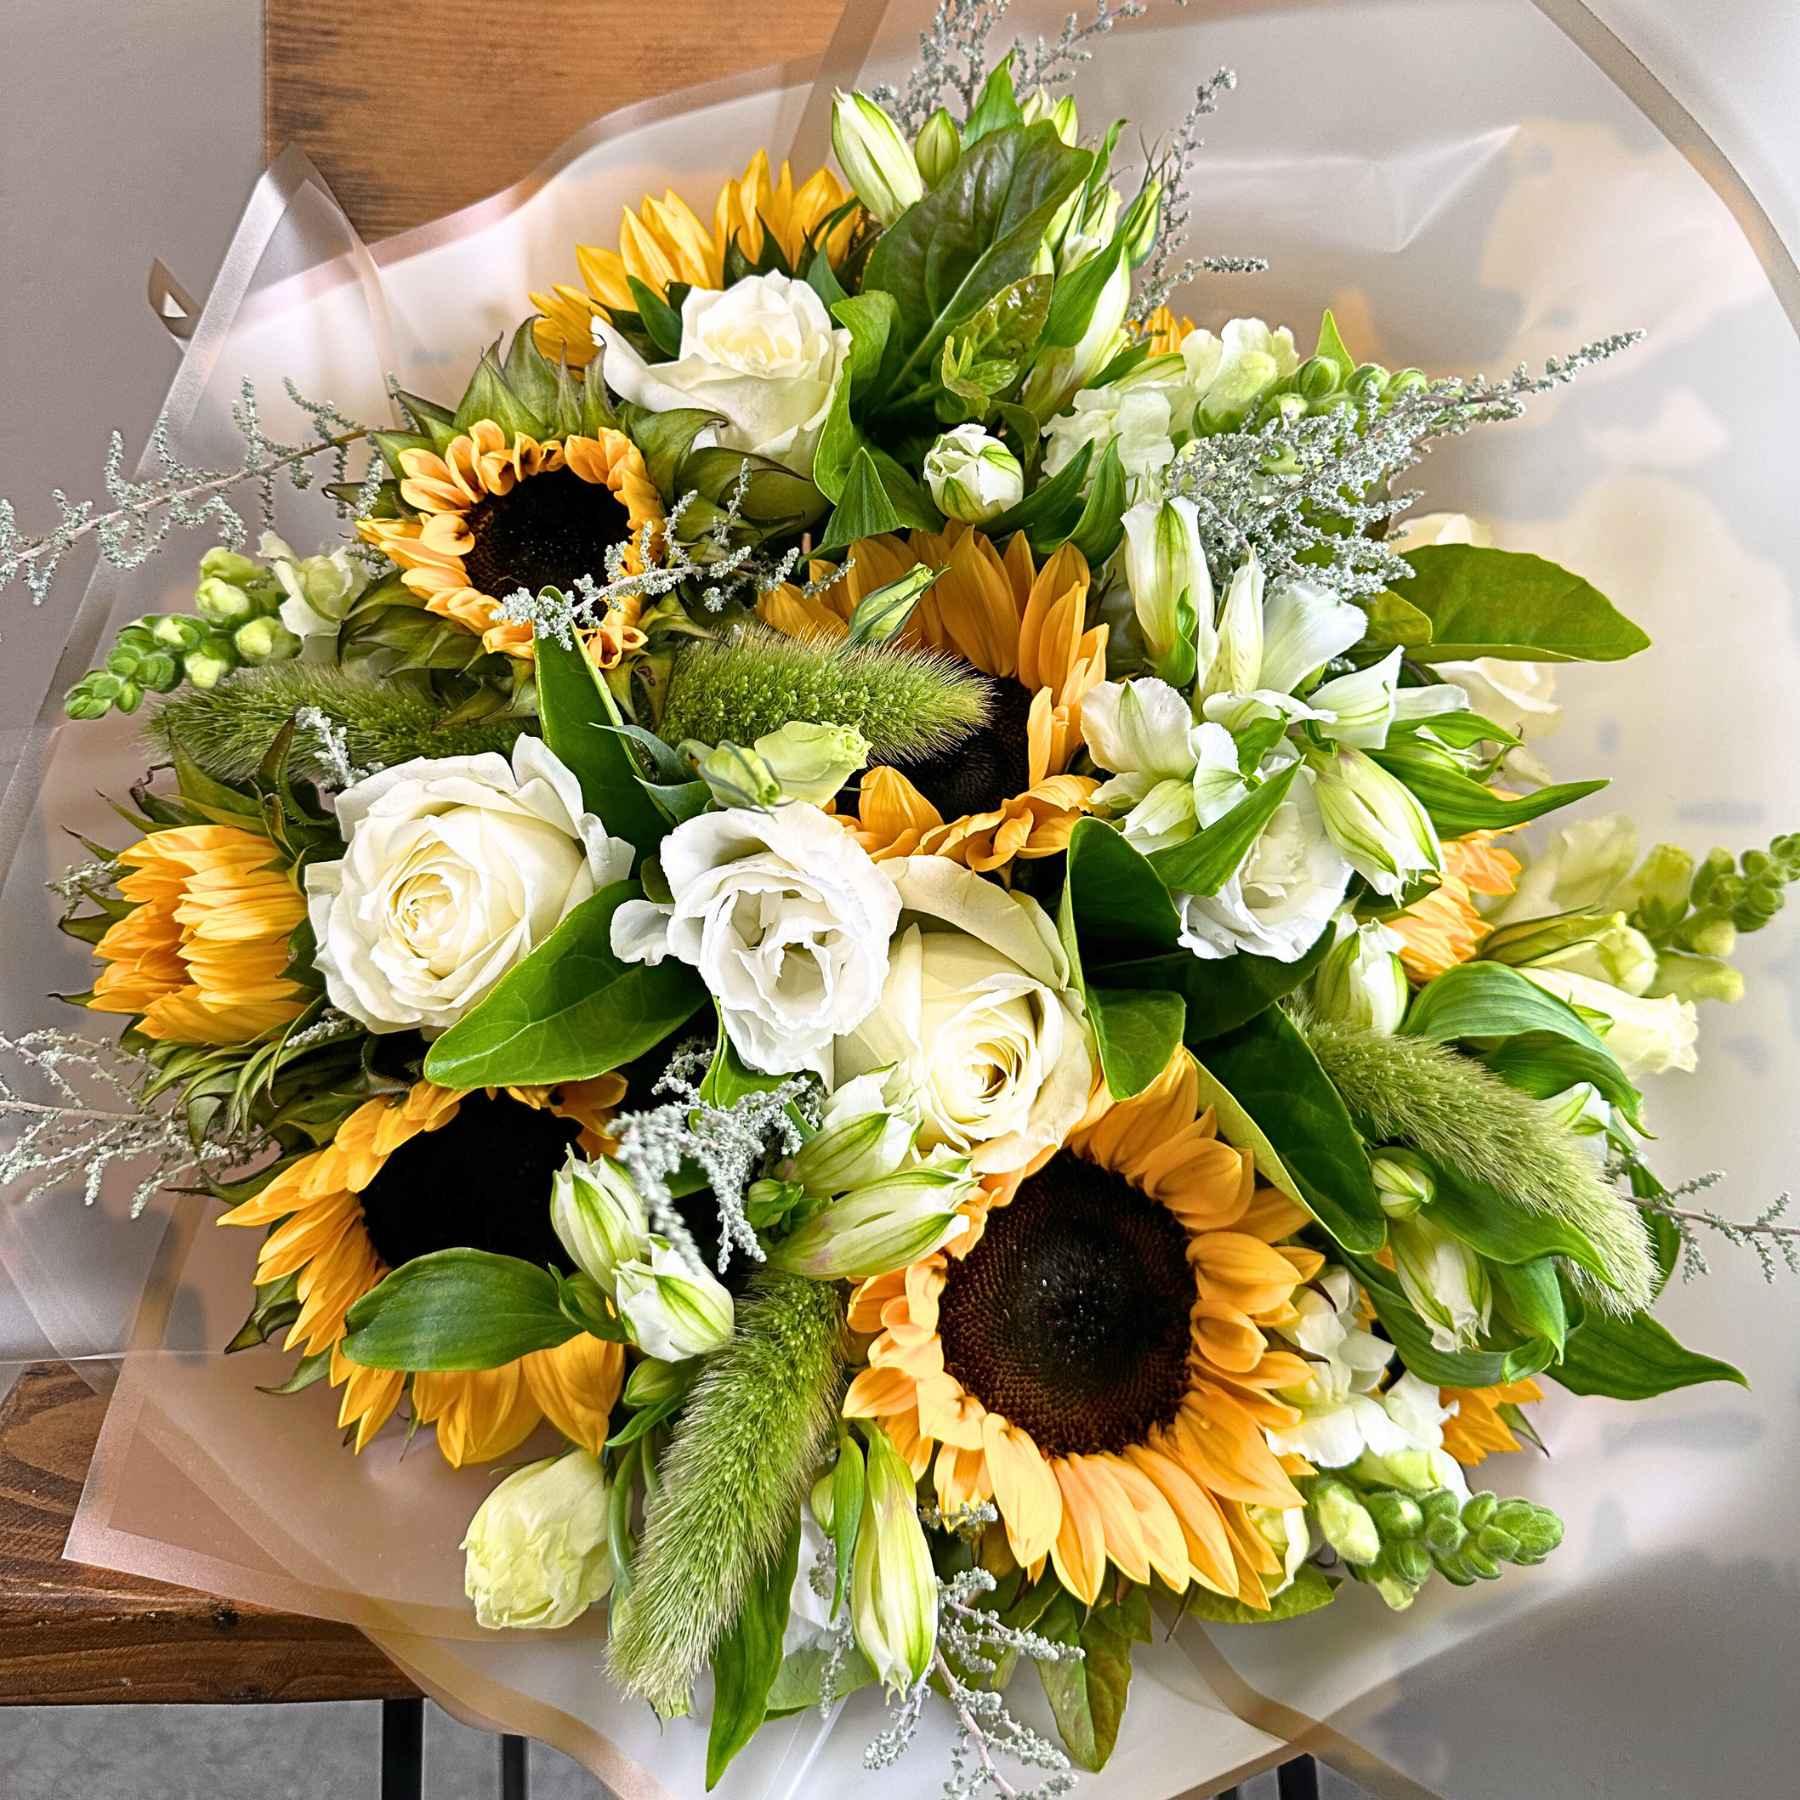 A joyful woman holding a large Sunflower Garden Flower Bouquet, filled with bright sunflowers, white roses, and vibrant greenery. This bouquet is part of the Sunflower Garden Flower Bouquet Collection by Fabulous Flowers and Gifts, designed to bring happiness and beauty to special moments.